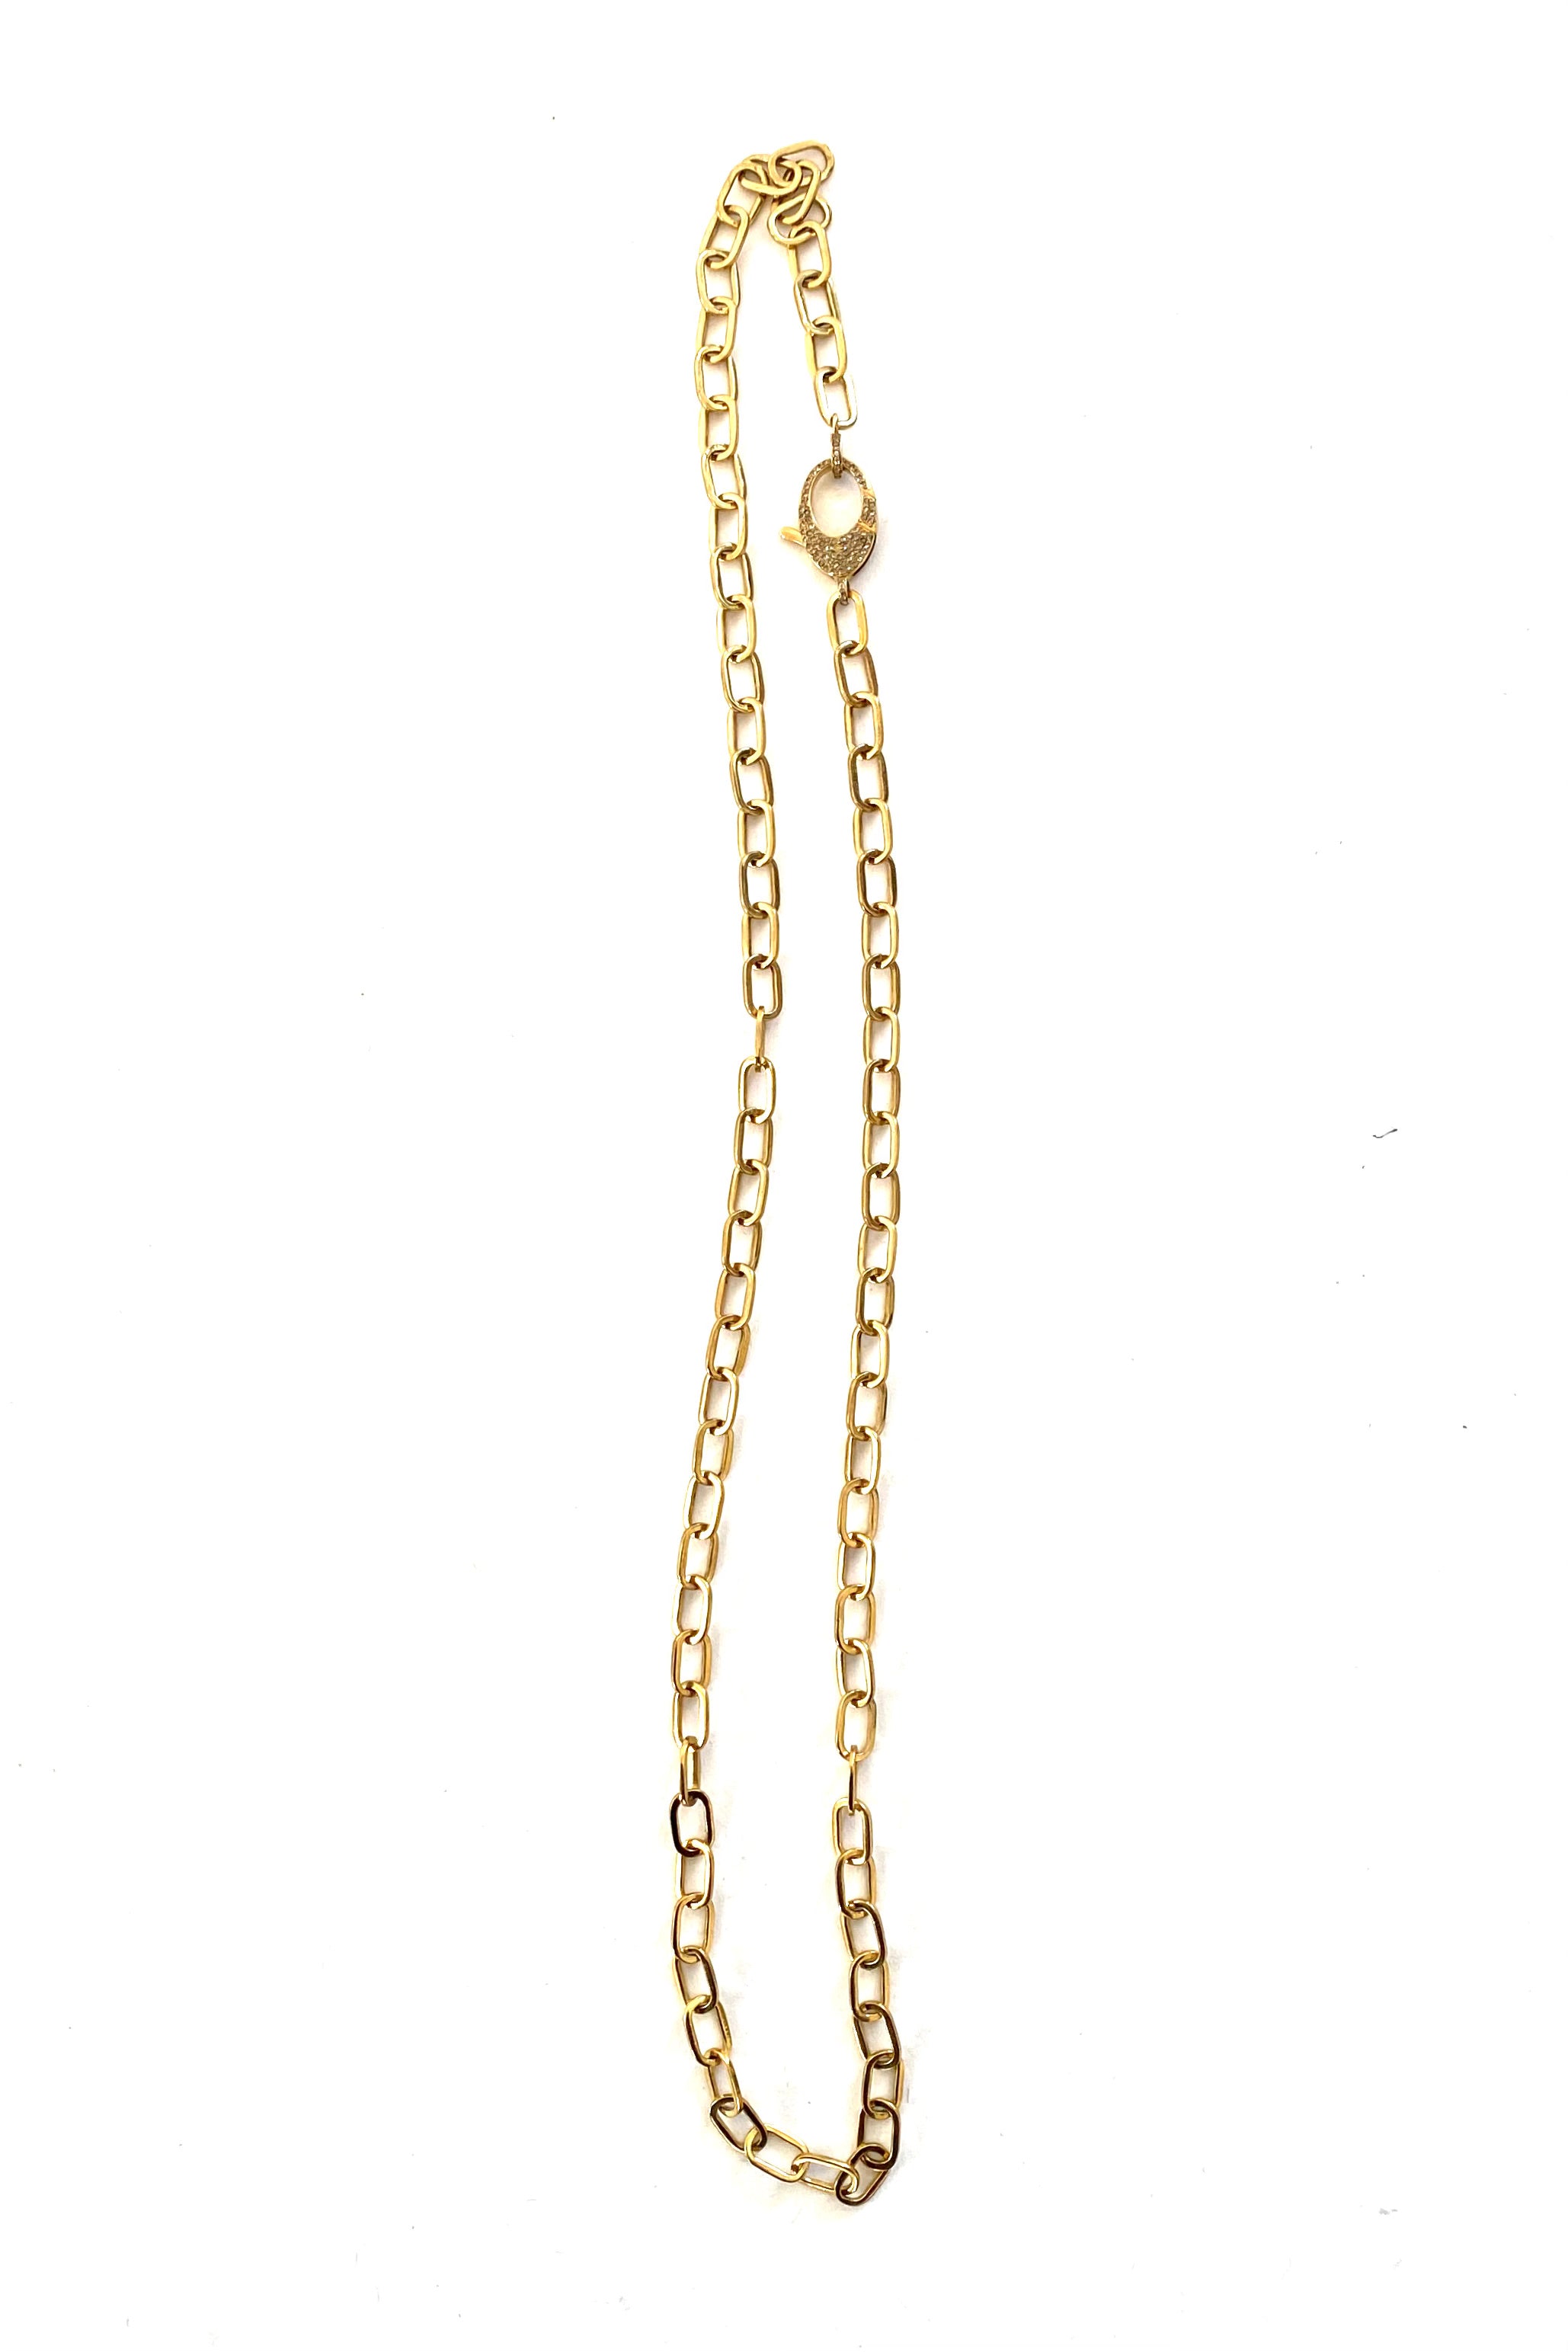 brass paperclip chain - 31"